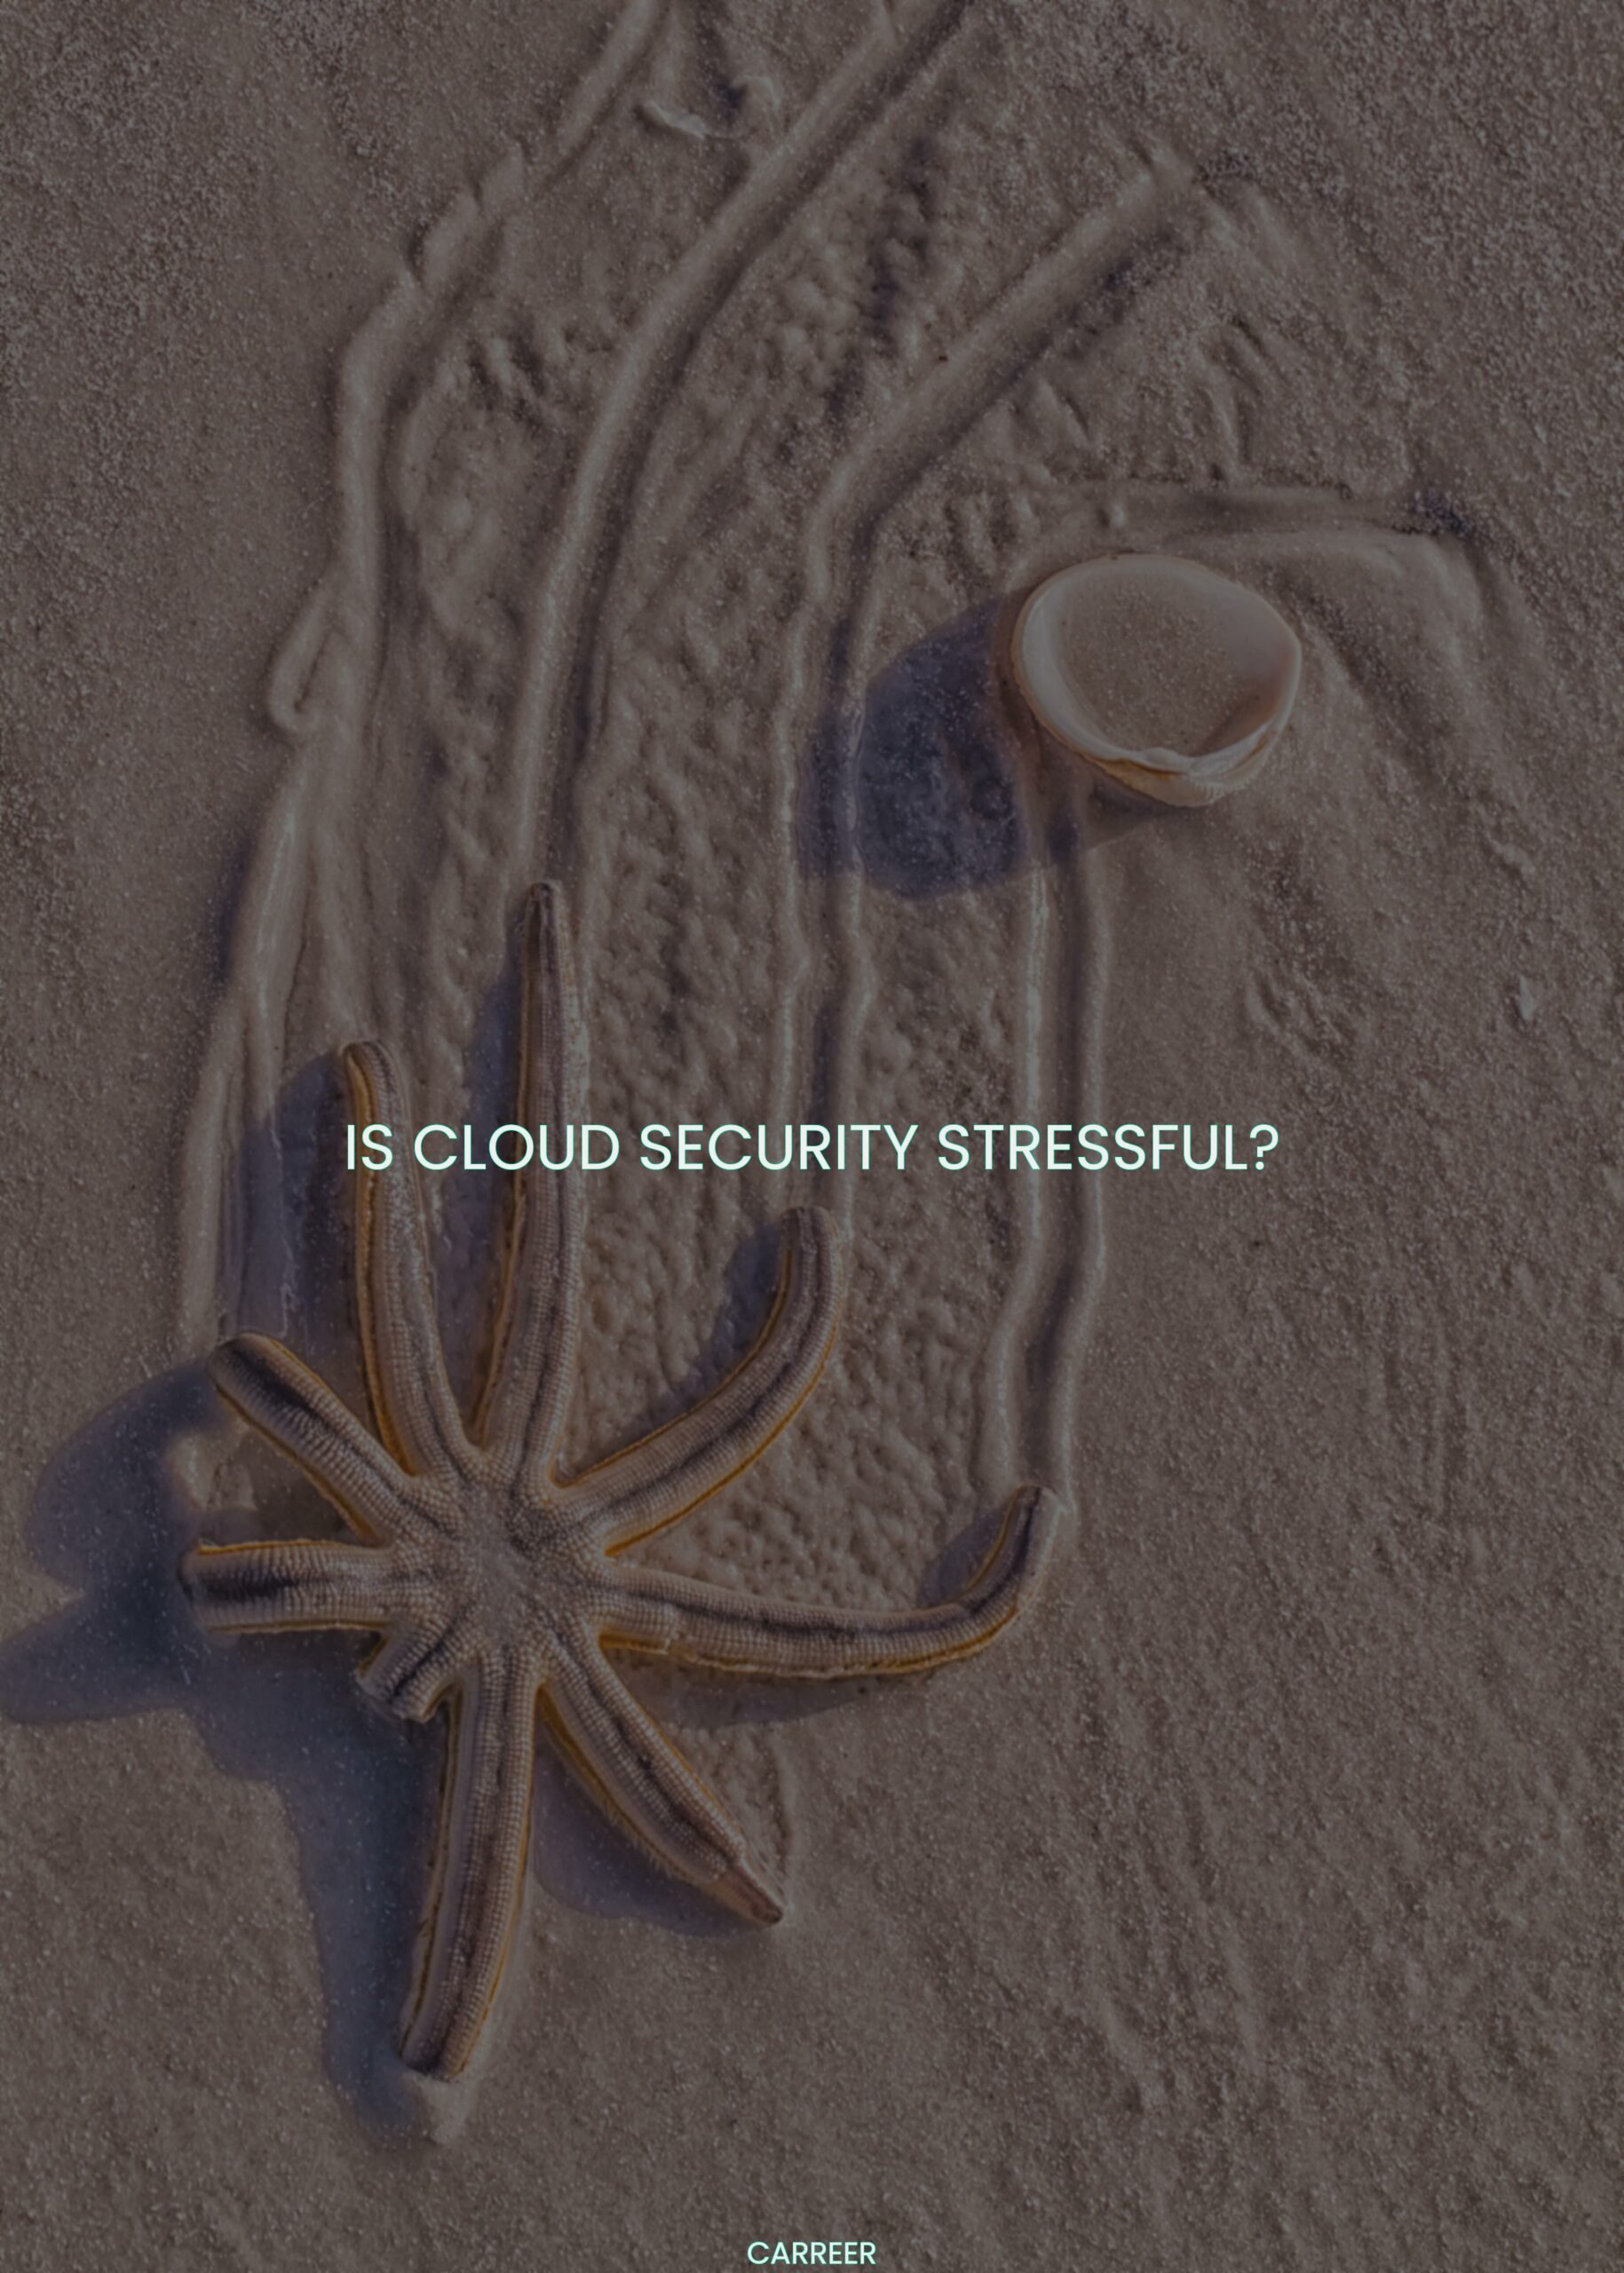 Is cloud security stressful?